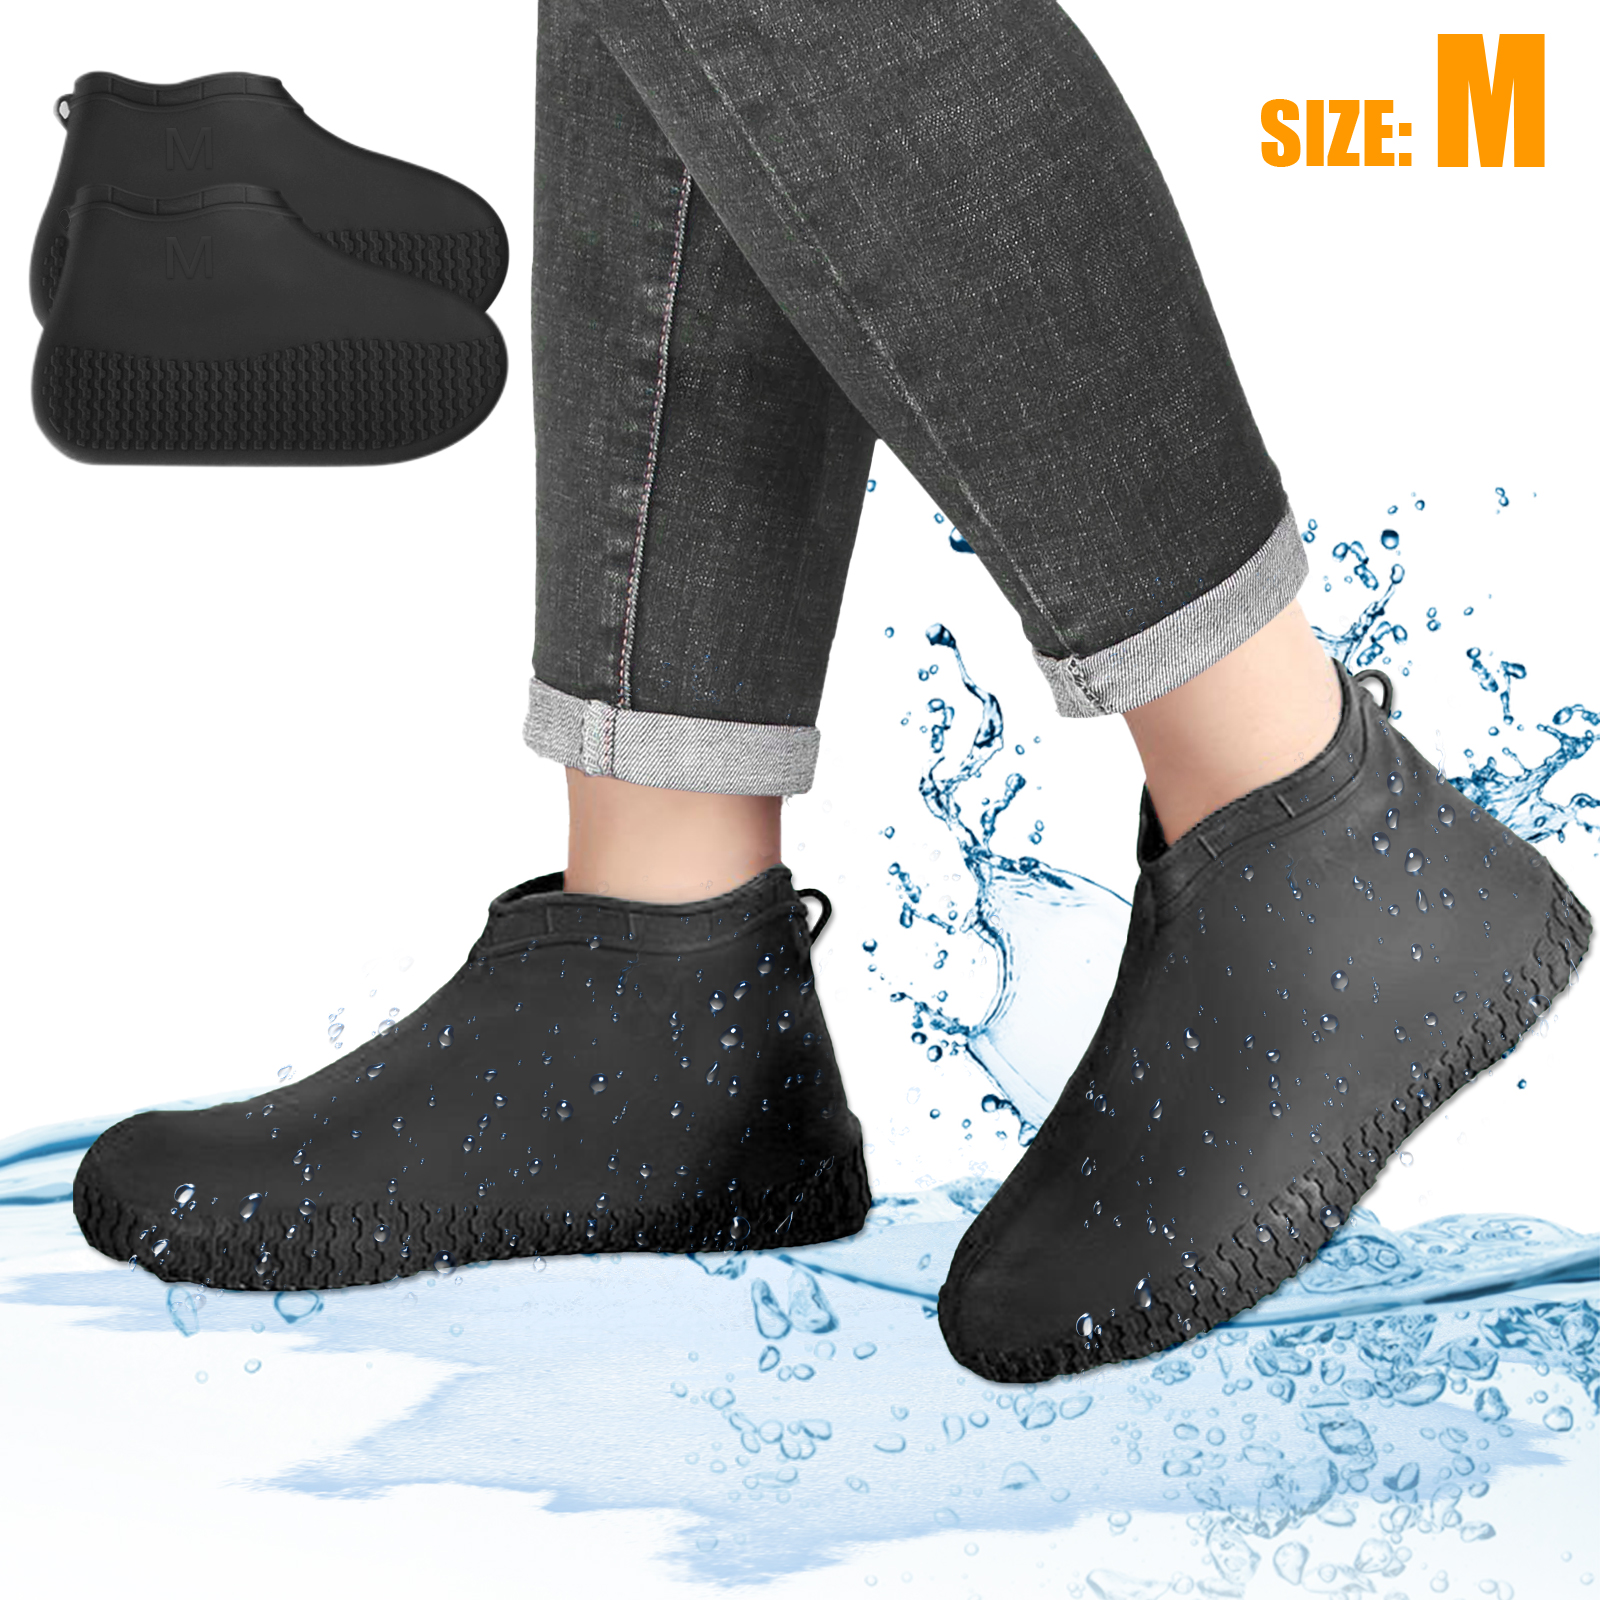 Silicone Overshoes Waterproof Shoes Covers Rain Boots Cover Protector Reusable 